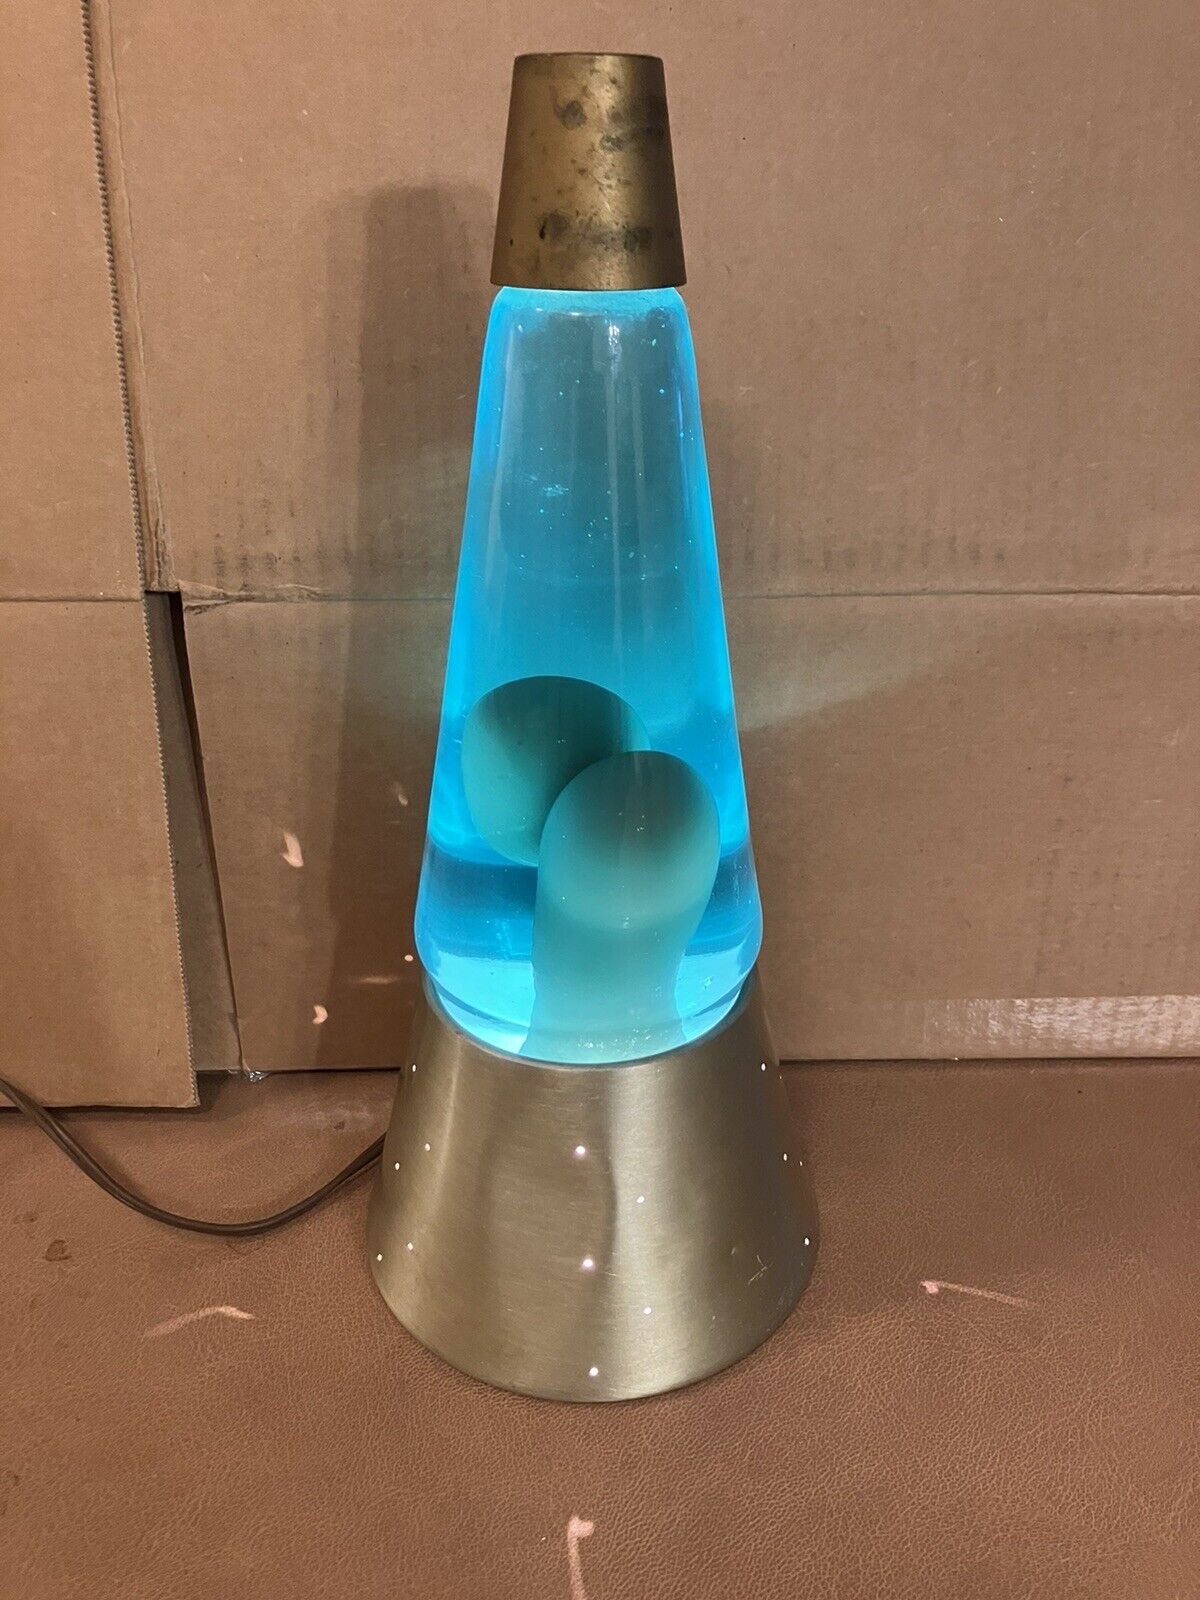 Vintage 1970s Lava Lite Lamp Green And Gold Starlight Base Tested Works 13.5